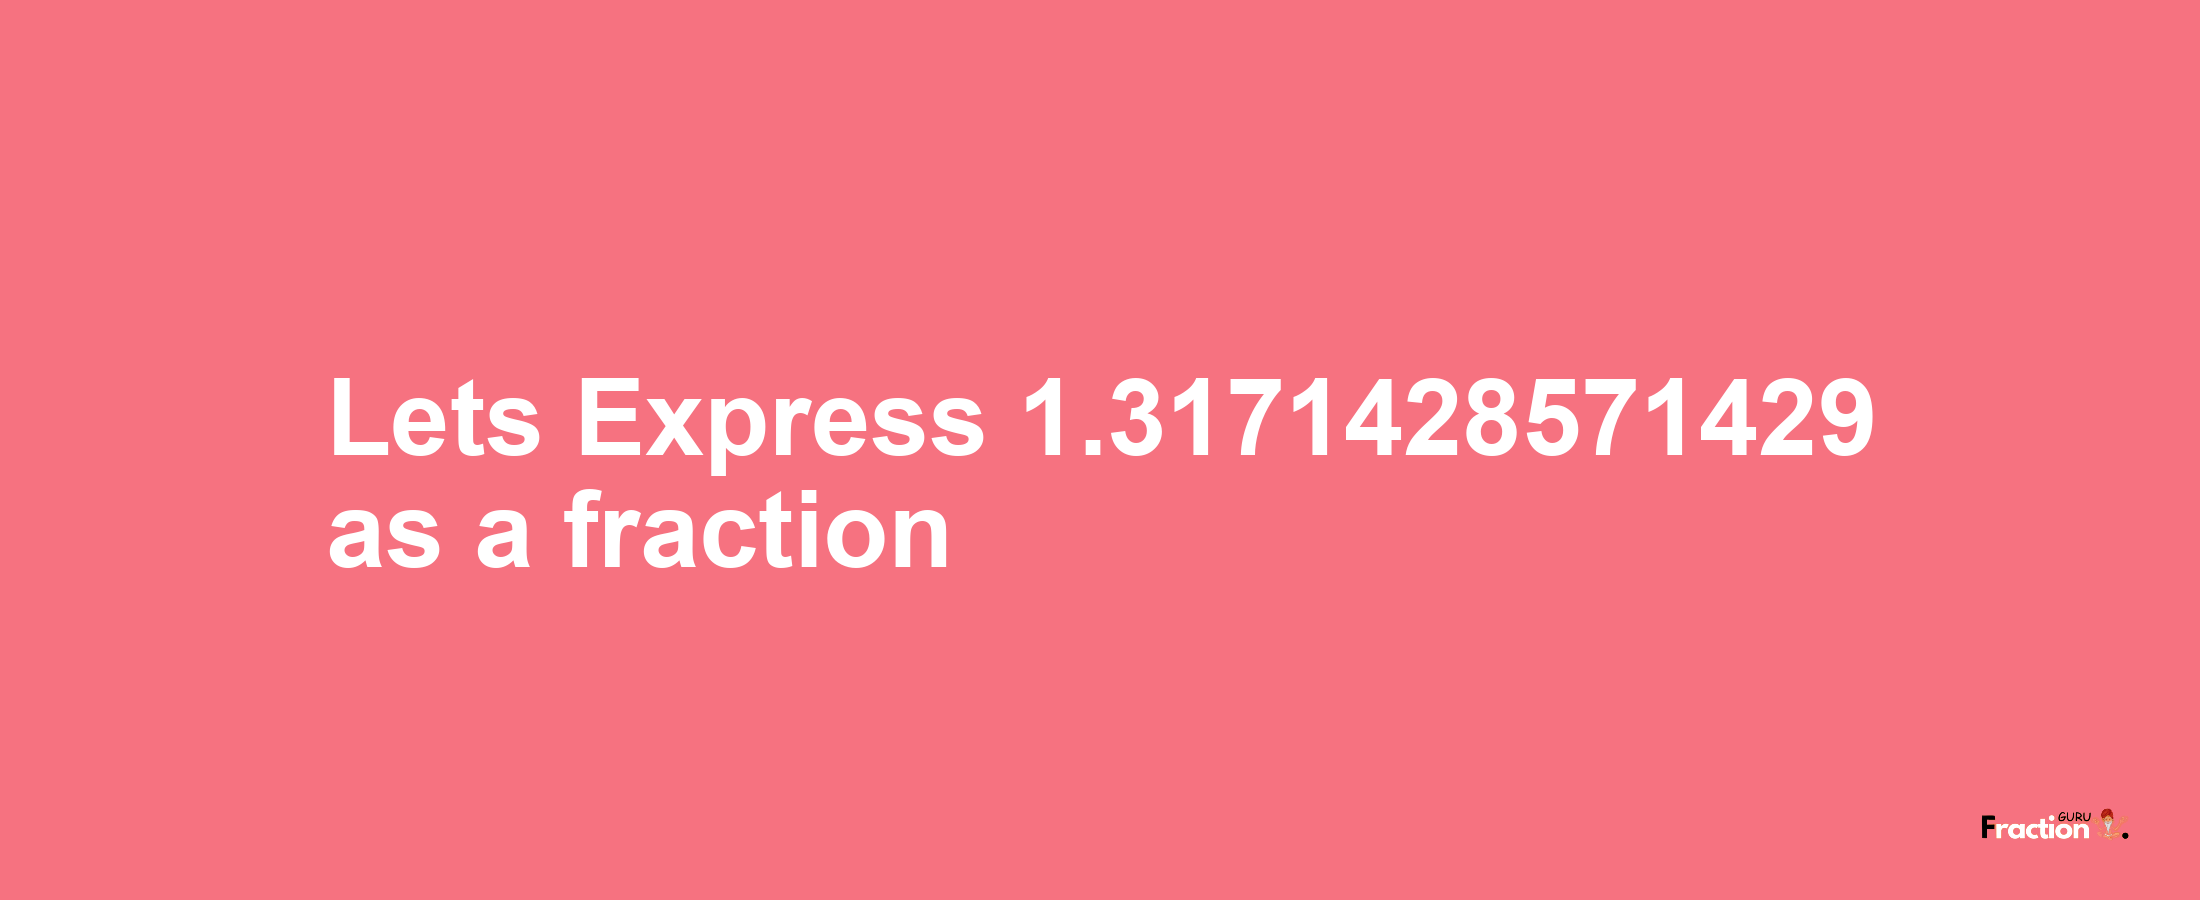 Lets Express 1.3171428571429 as afraction